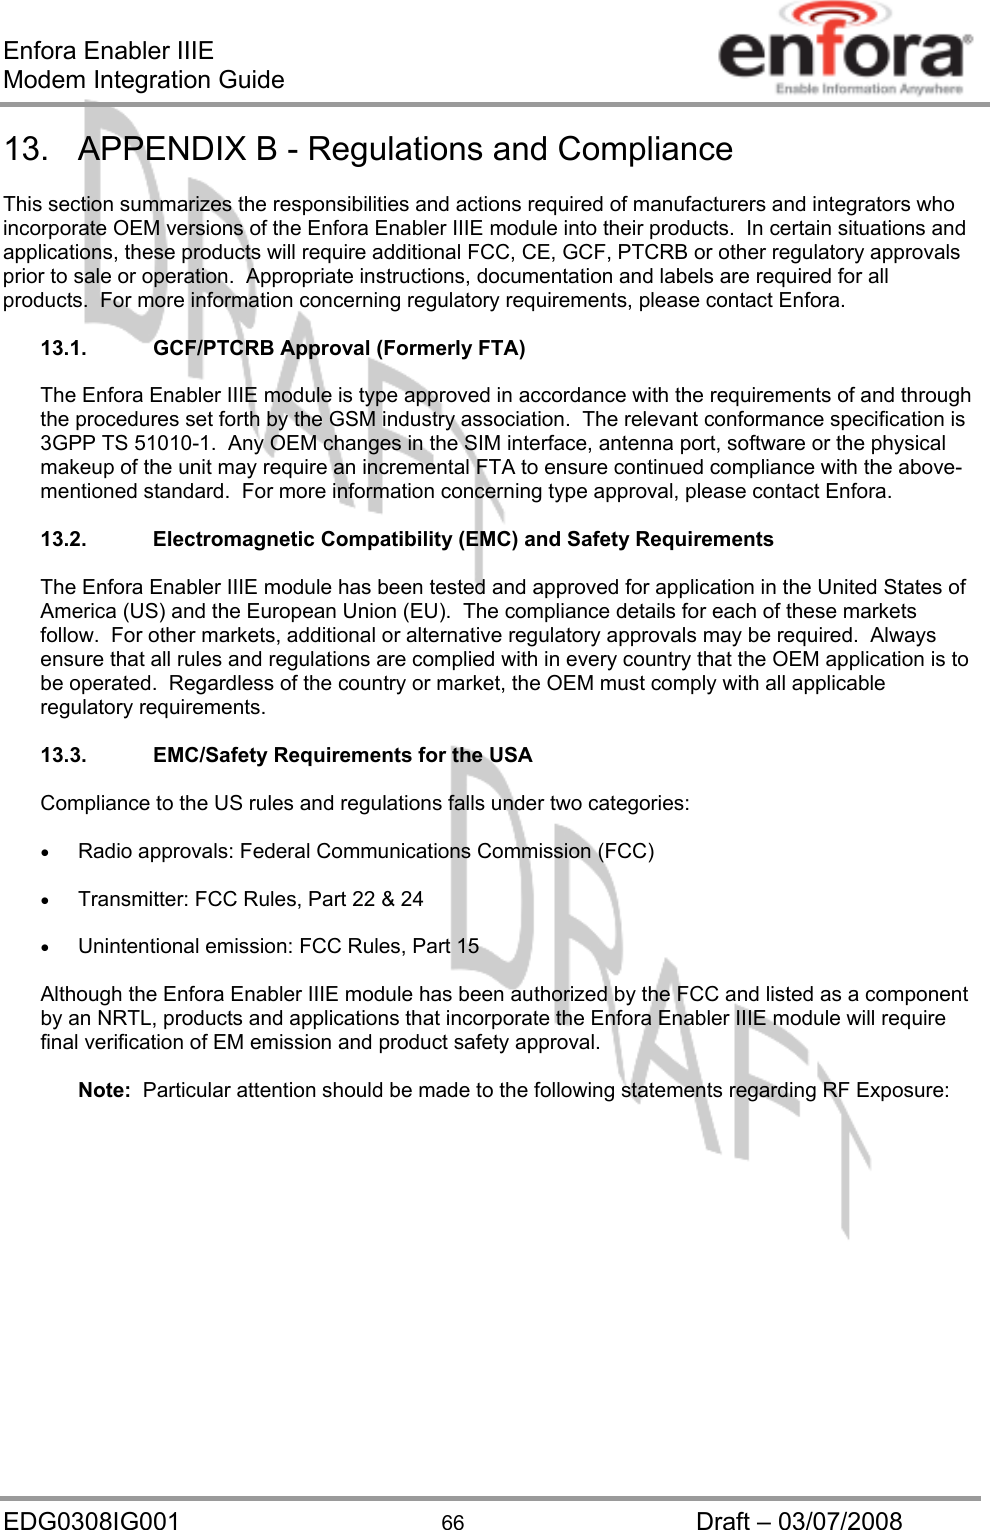 Enfora Enabler IIIE Modem Integration Guide EDG0308IG001  66  Draft – 03/07/2008 13.  APPENDIX B - Regulations and Compliance  This section summarizes the responsibilities and actions required of manufacturers and integrators who incorporate OEM versions of the Enfora Enabler IIIE module into their products.  In certain situations and applications, these products will require additional FCC, CE, GCF, PTCRB or other regulatory approvals prior to sale or operation.  Appropriate instructions, documentation and labels are required for all products.  For more information concerning regulatory requirements, please contact Enfora.  13.1.  GCF/PTCRB Approval (Formerly FTA)  The Enfora Enabler IIIE module is type approved in accordance with the requirements of and through the procedures set forth by the GSM industry association.  The relevant conformance specification is 3GPP TS 51010-1.  Any OEM changes in the SIM interface, antenna port, software or the physical makeup of the unit may require an incremental FTA to ensure continued compliance with the above-mentioned standard.  For more information concerning type approval, please contact Enfora.  13.2. Electromagnetic Compatibility (EMC) and Safety Requirements  The Enfora Enabler IIIE module has been tested and approved for application in the United States of America (US) and the European Union (EU).  The compliance details for each of these markets follow.  For other markets, additional or alternative regulatory approvals may be required.  Always ensure that all rules and regulations are complied with in every country that the OEM application is to be operated.  Regardless of the country or market, the OEM must comply with all applicable regulatory requirements.  13.3.  EMC/Safety Requirements for the USA  Compliance to the US rules and regulations falls under two categories:  •  Radio approvals: Federal Communications Commission (FCC)  •  Transmitter: FCC Rules, Part 22 &amp; 24  •  Unintentional emission: FCC Rules, Part 15  Although the Enfora Enabler IIIE module has been authorized by the FCC and listed as a component by an NRTL, products and applications that incorporate the Enfora Enabler IIIE module will require final verification of EM emission and product safety approval.  Note:  Particular attention should be made to the following statements regarding RF Exposure: 